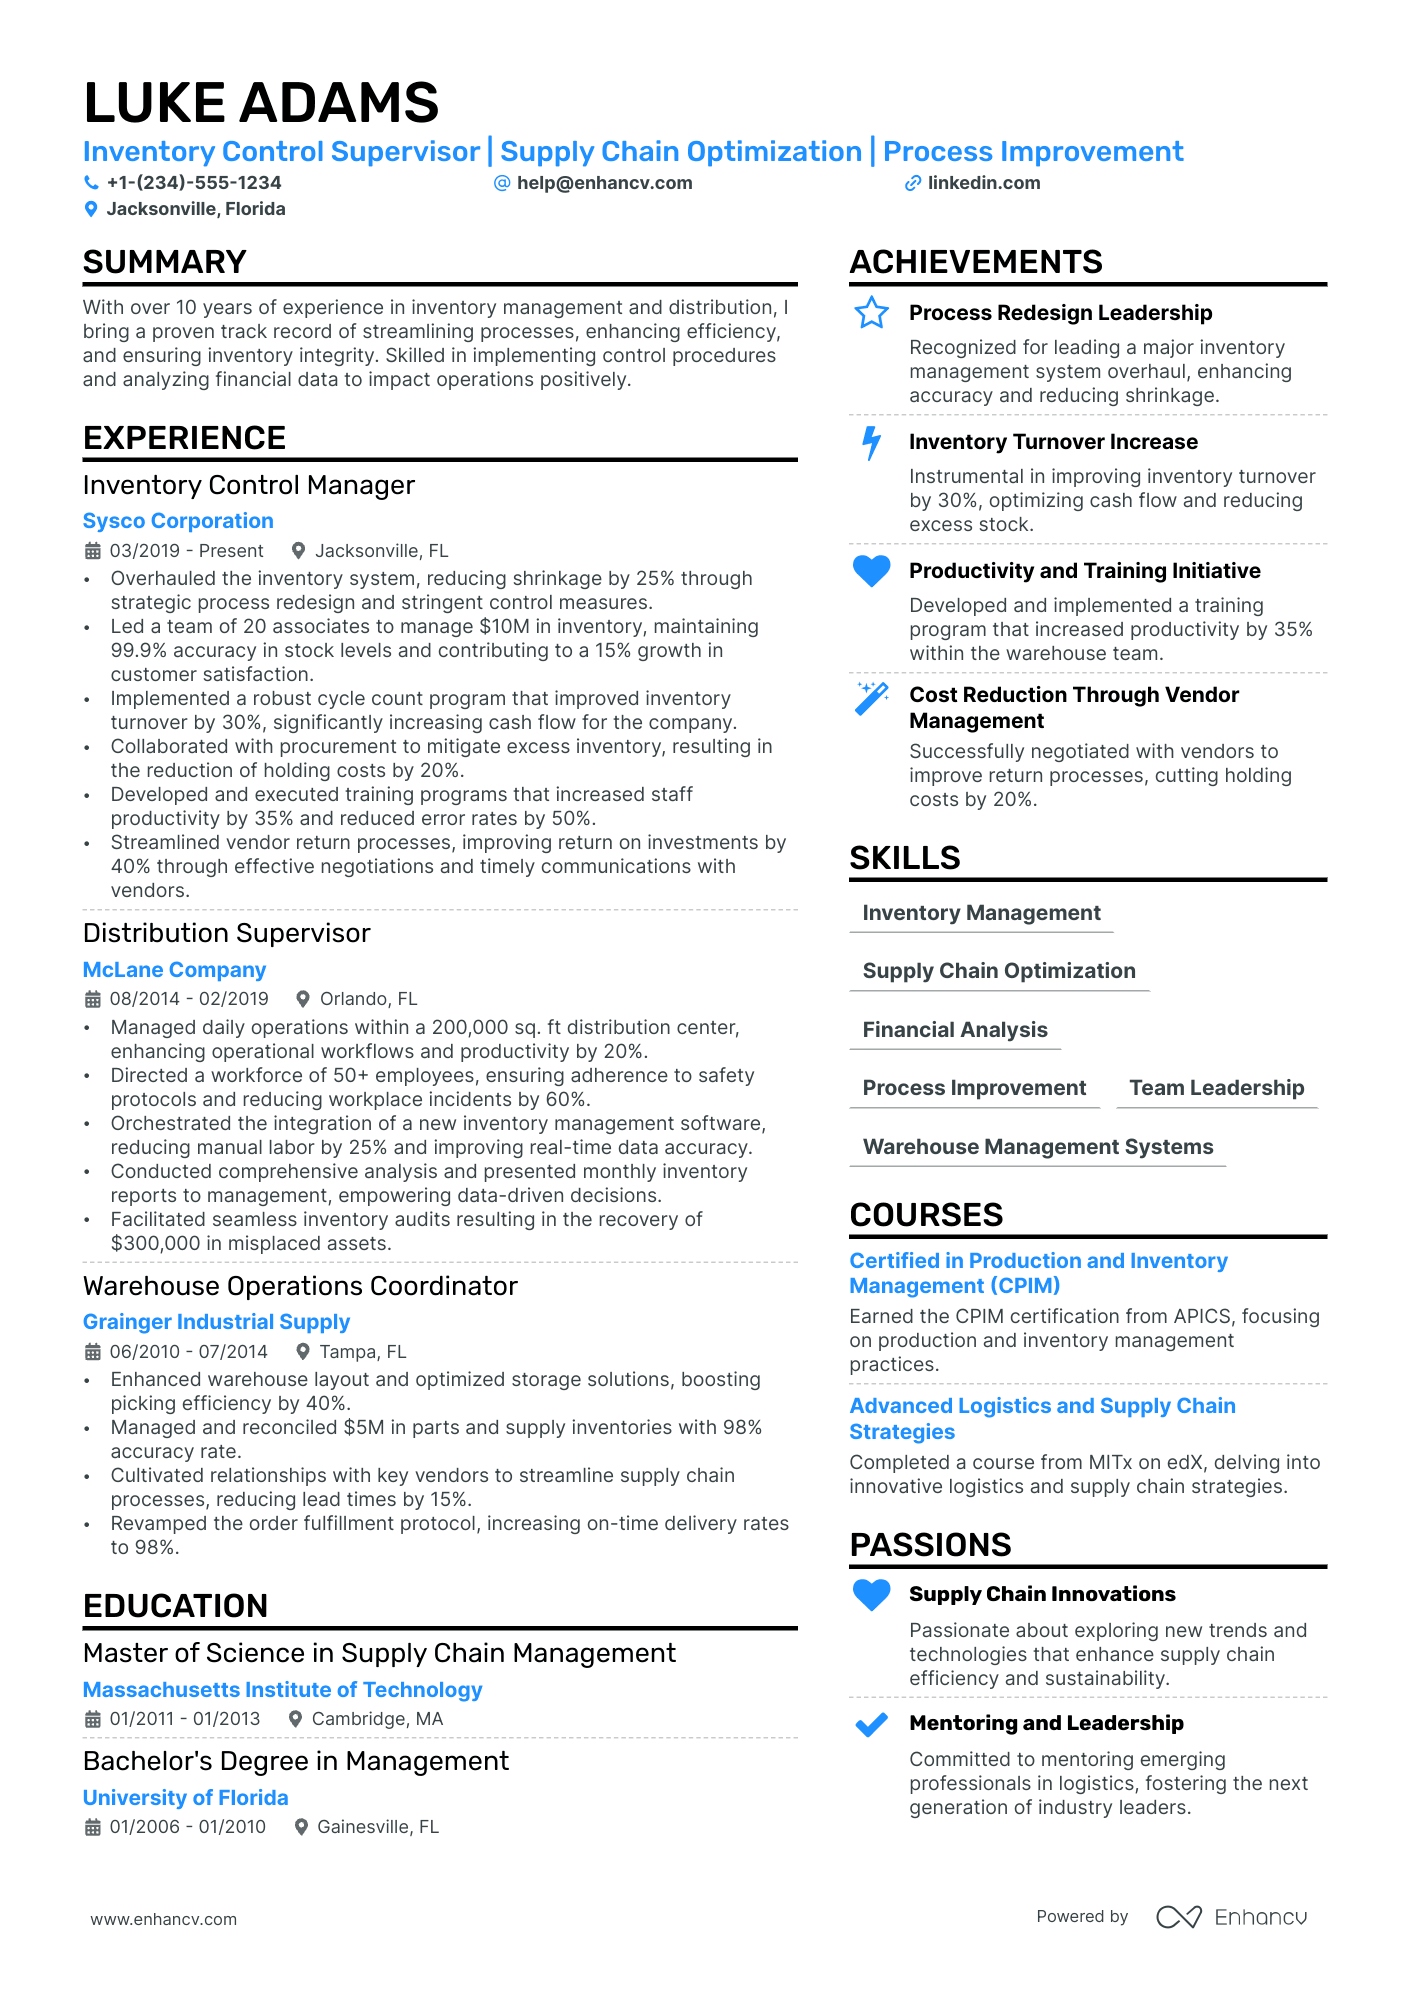 Inventory Control Manager resume example